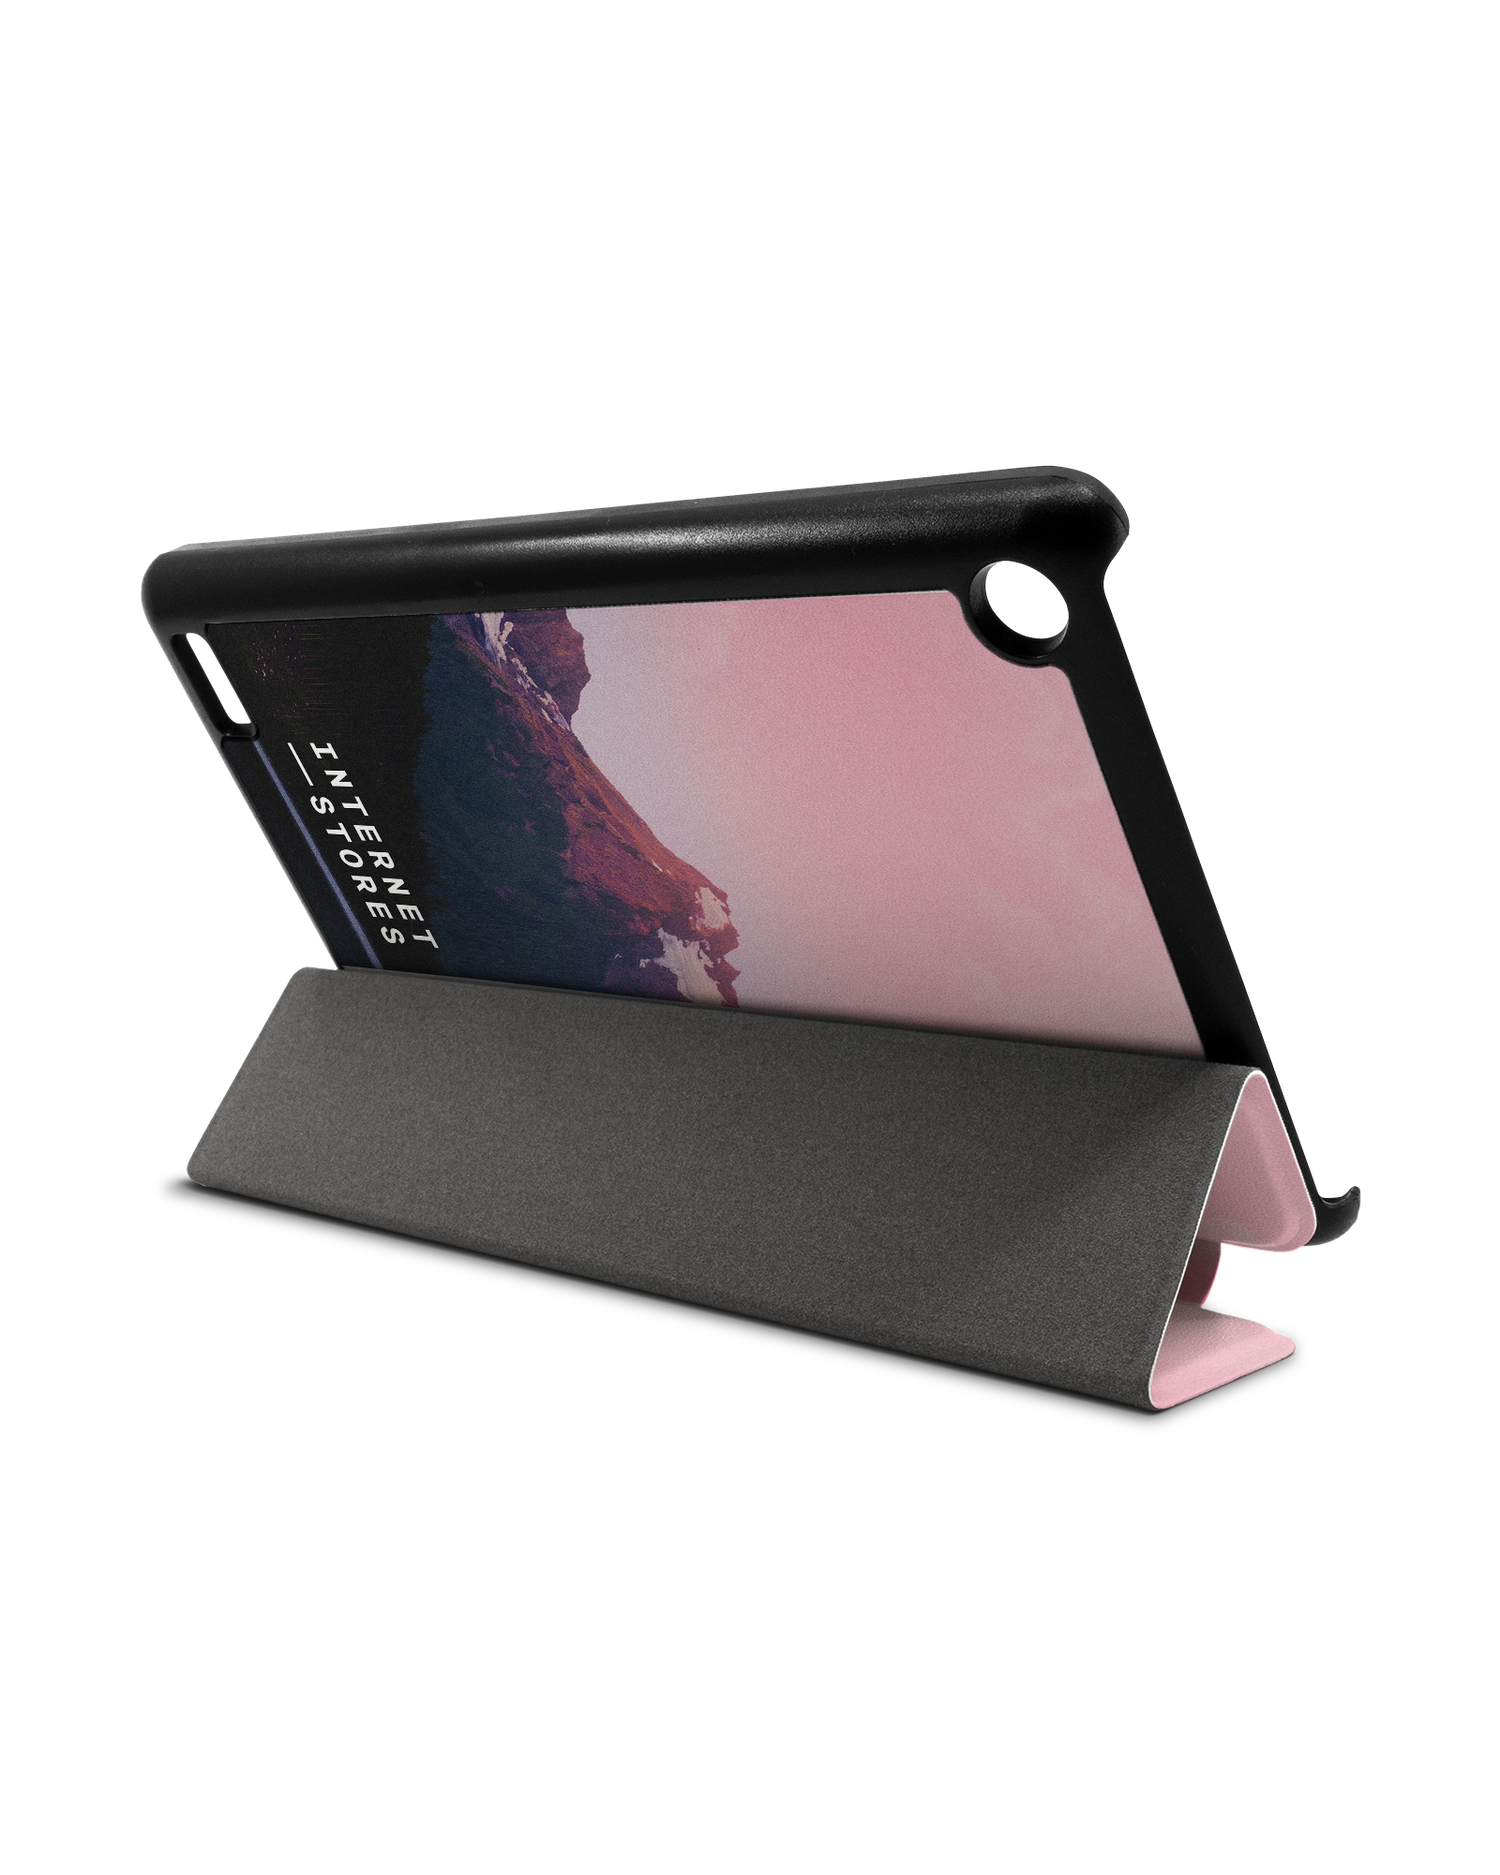 Lake Tablet Smart Case for Amazon Fire 7: Used as Stand